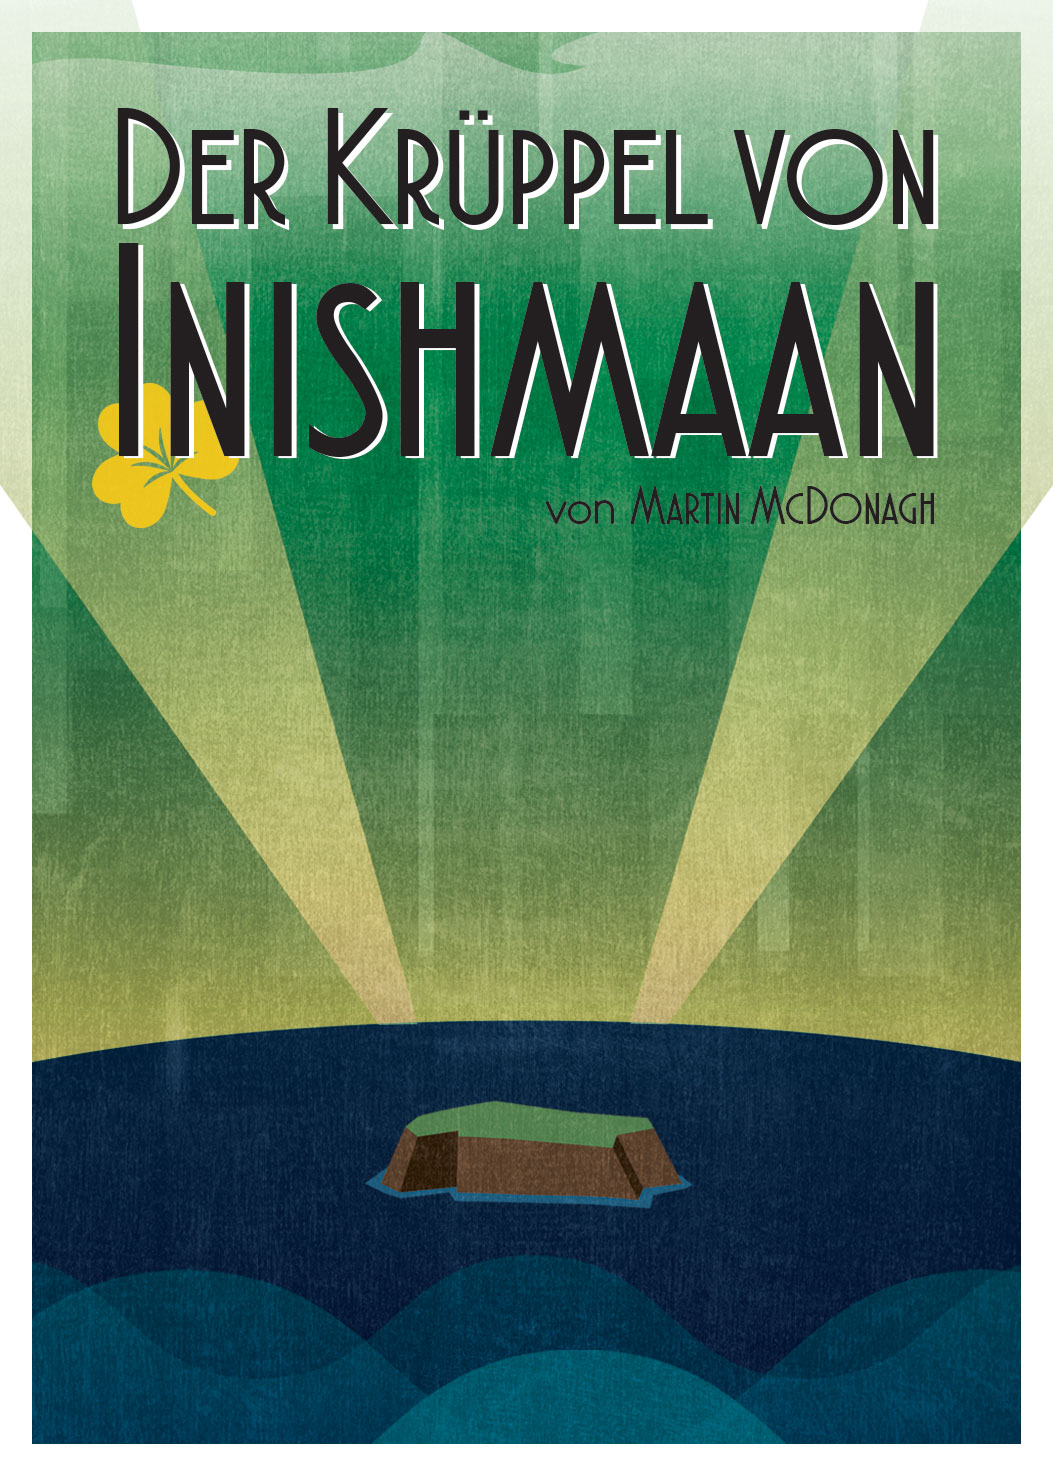 A6-Inishmaan